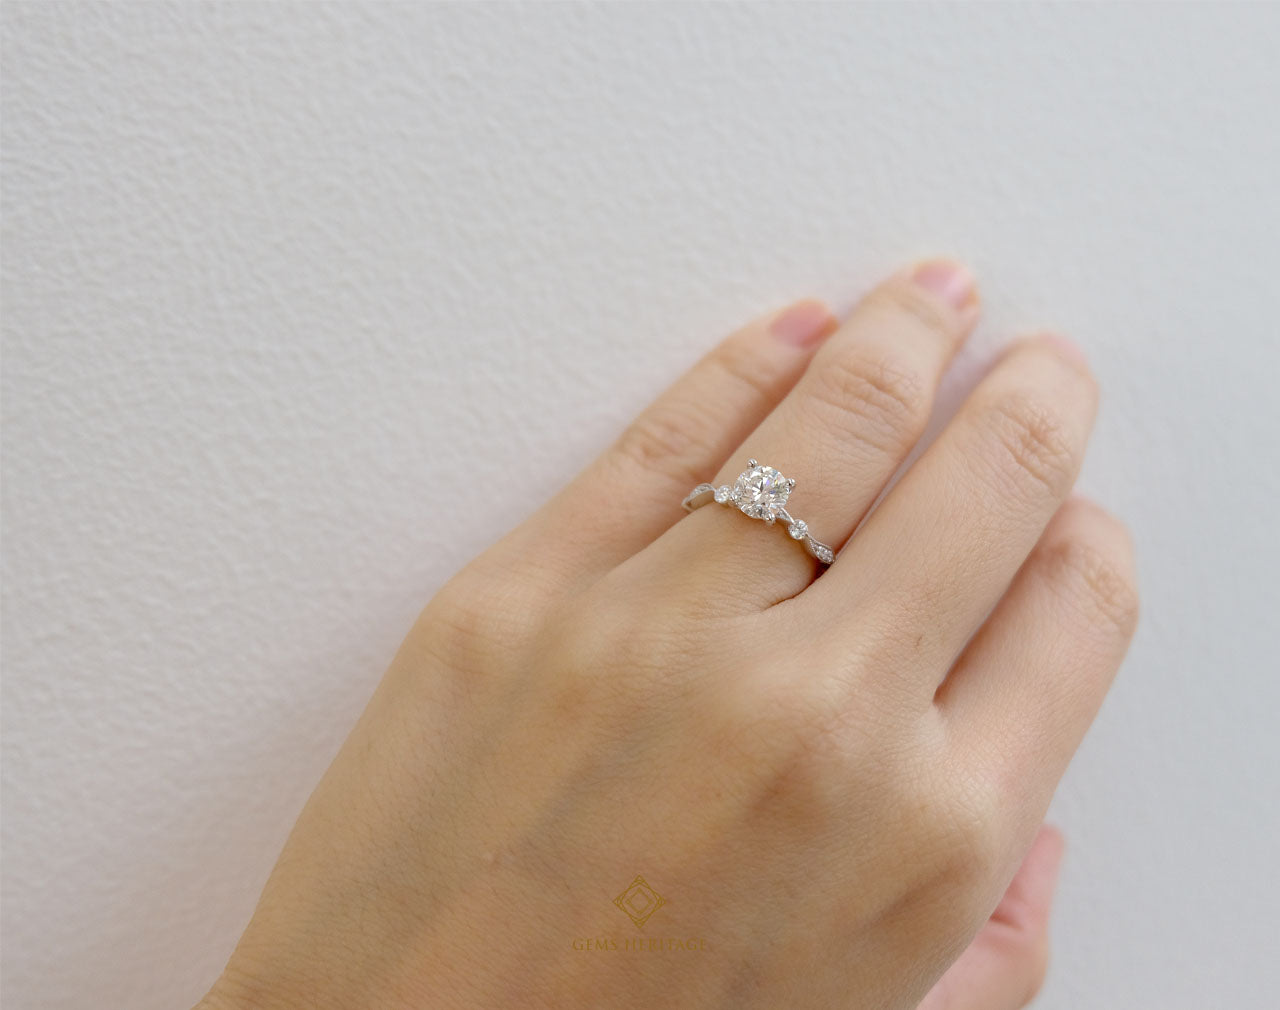 Dot and curve engagement ring